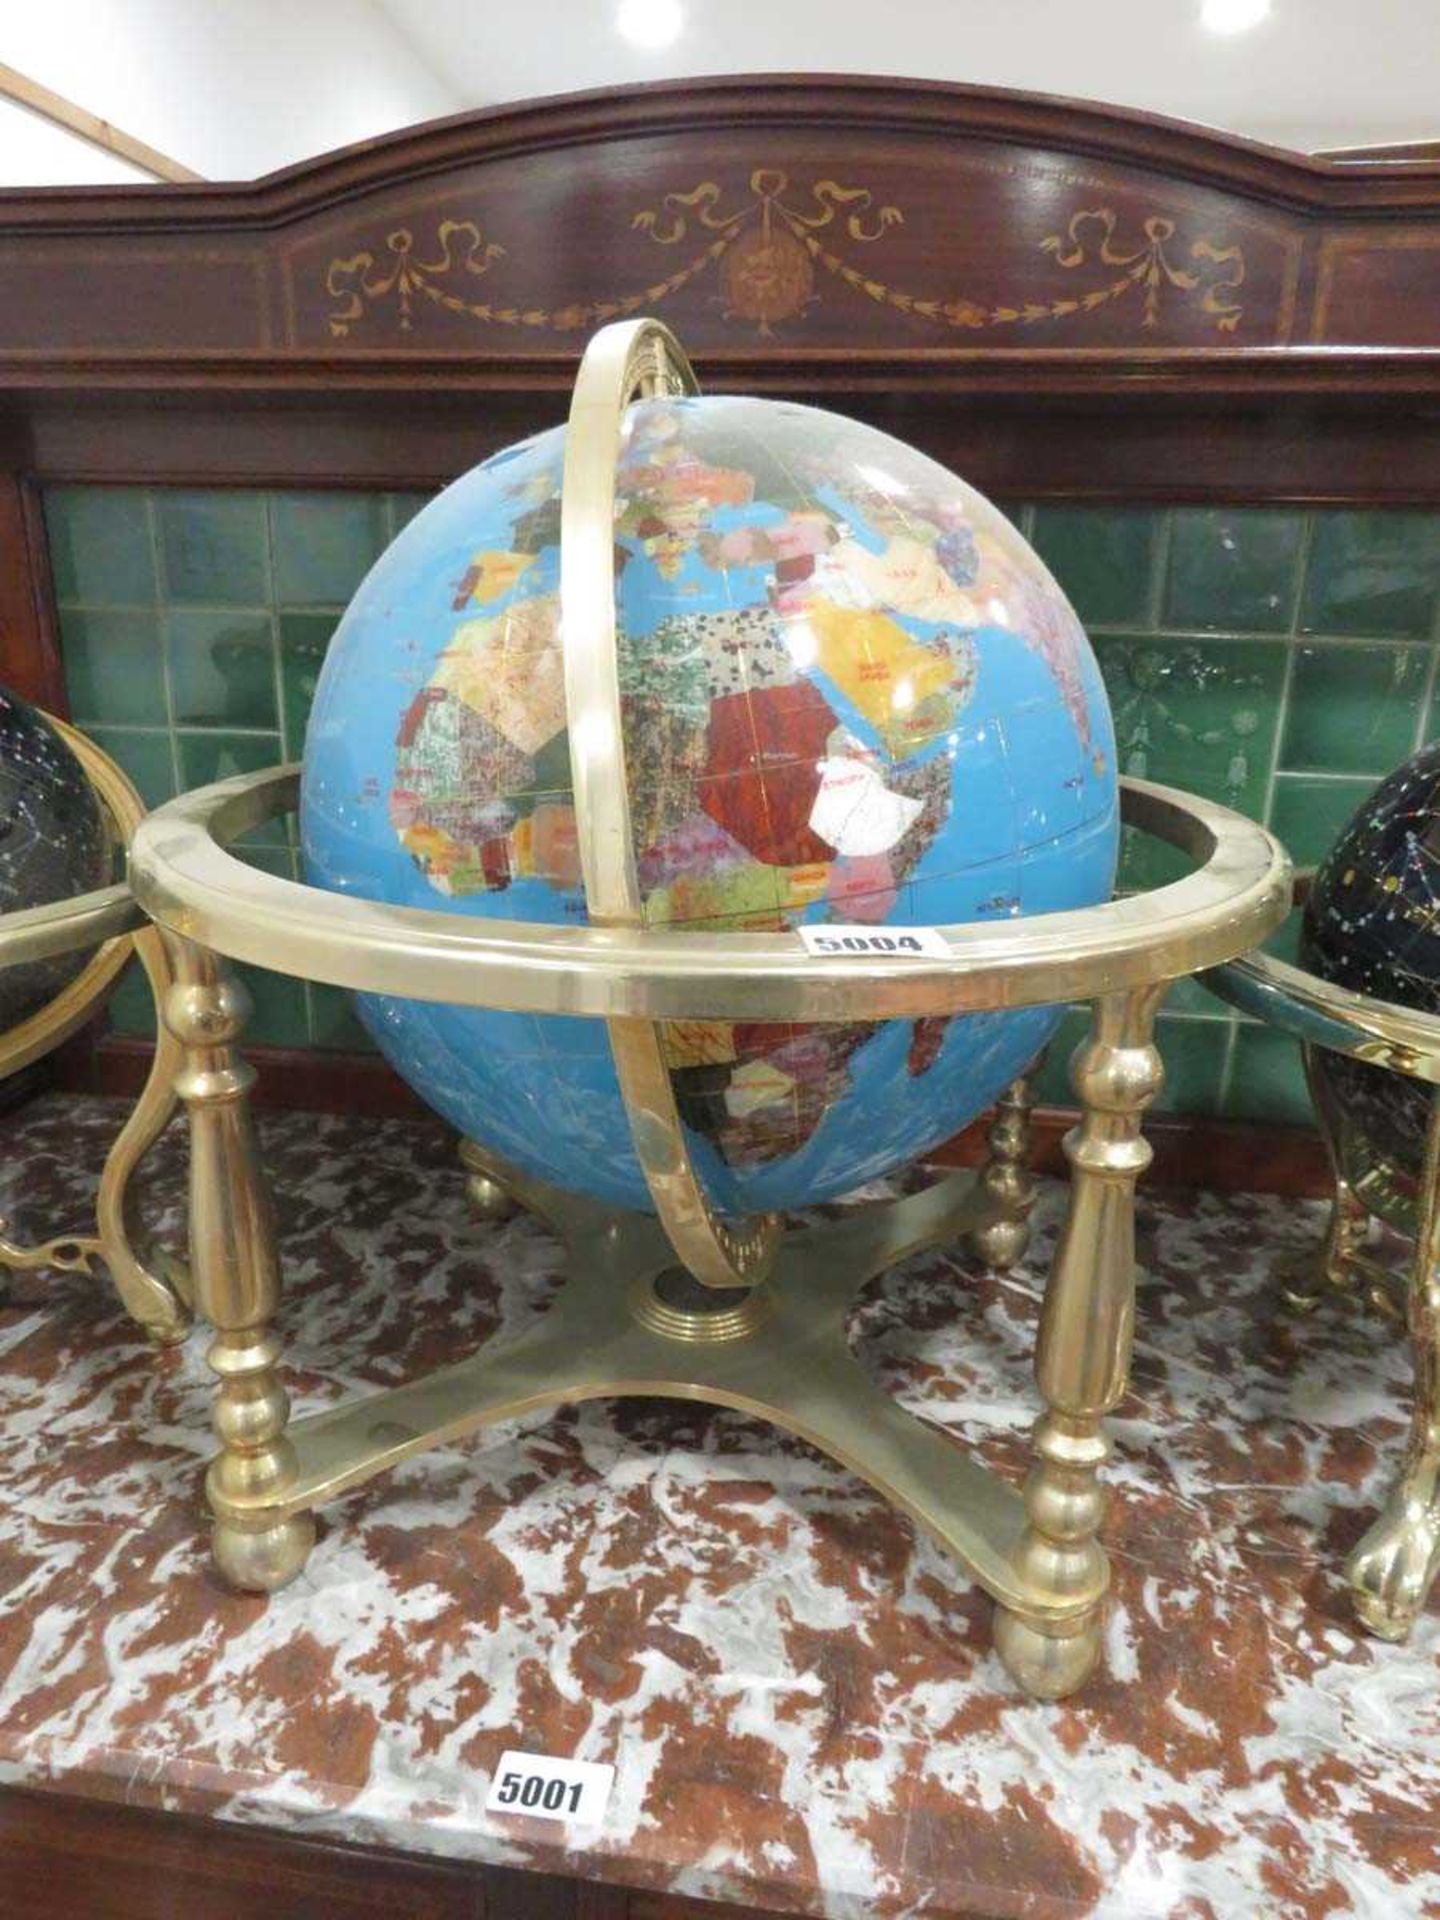 Small gem set globe contained within a brass stand